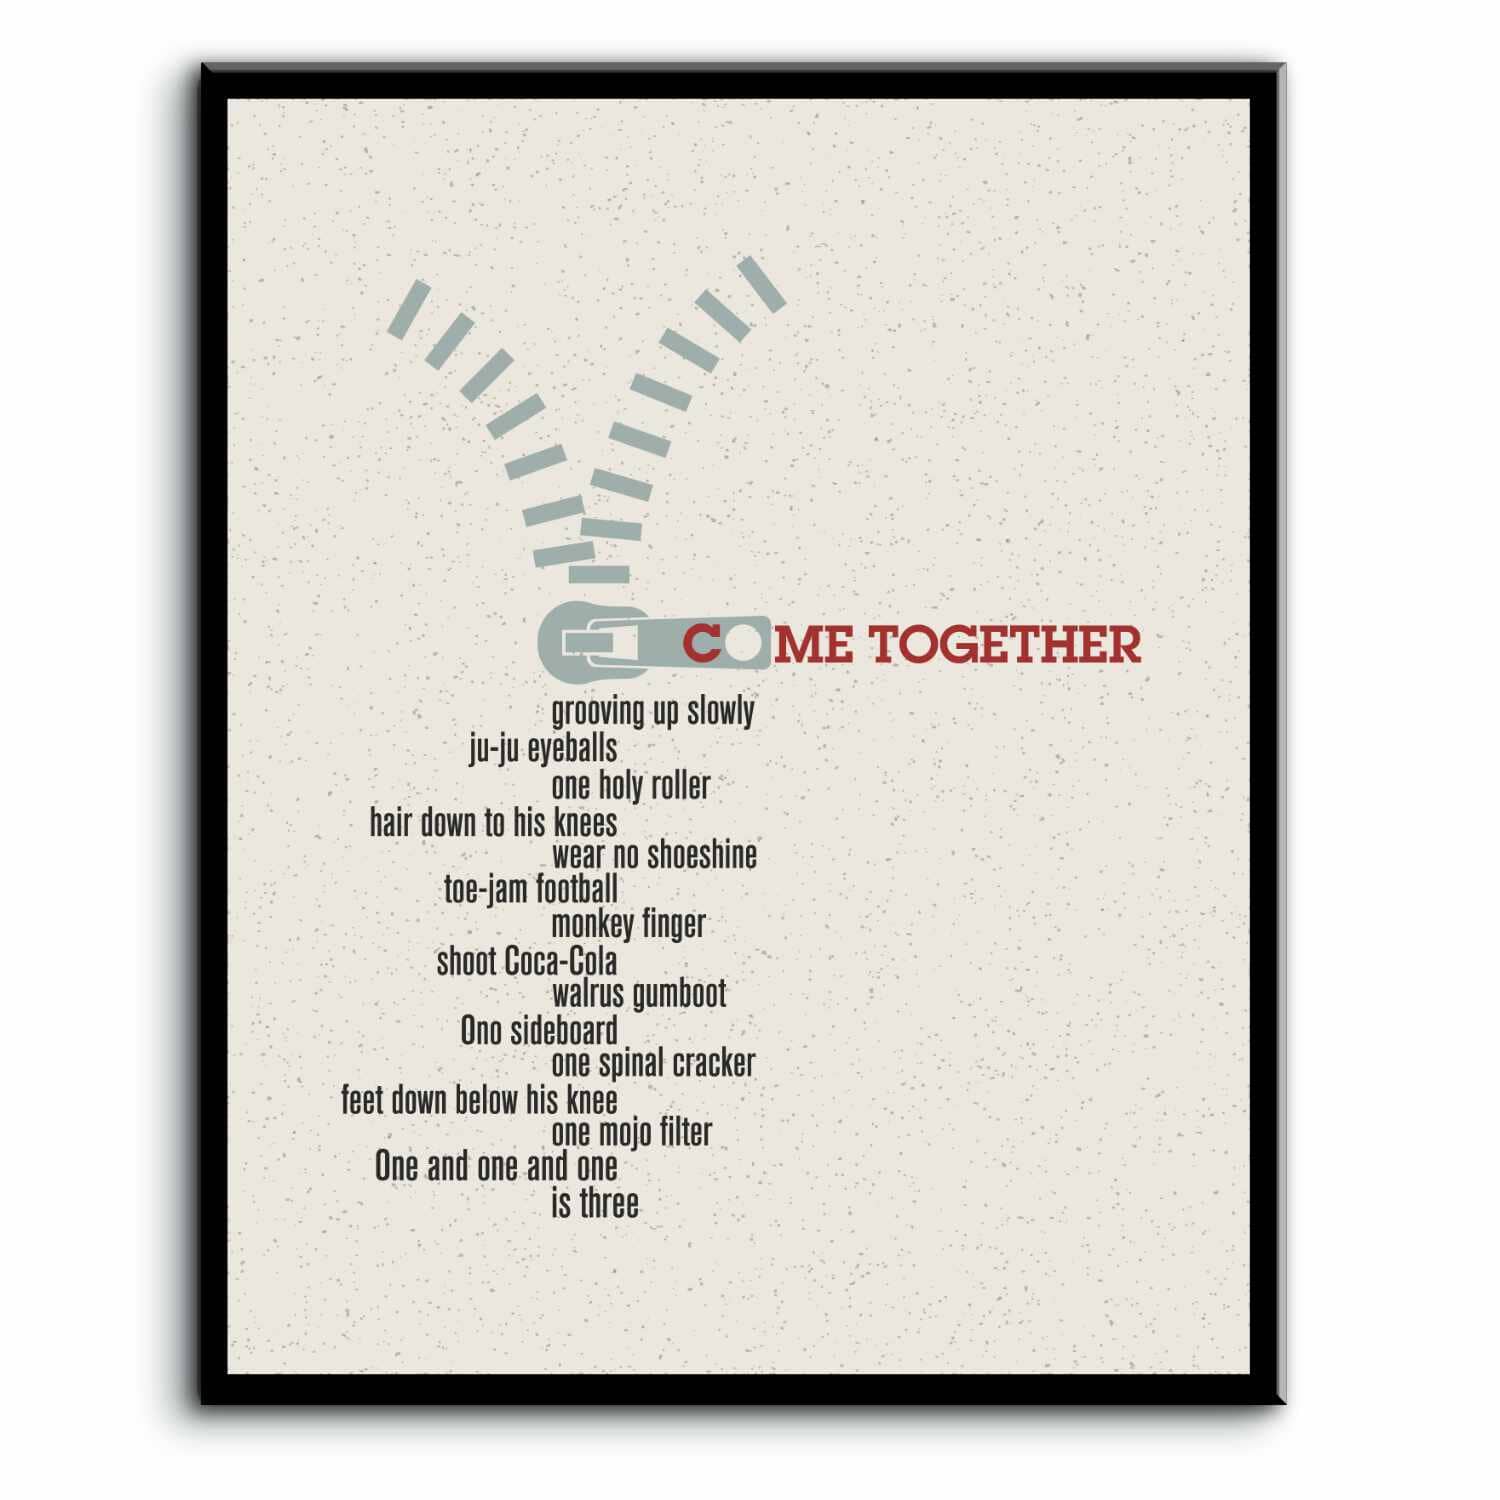 Come Together by the Beatles - Song Lyric Art Wall Print Song Lyrics Art Song Lyrics Art 8x10 Plaque Mount 